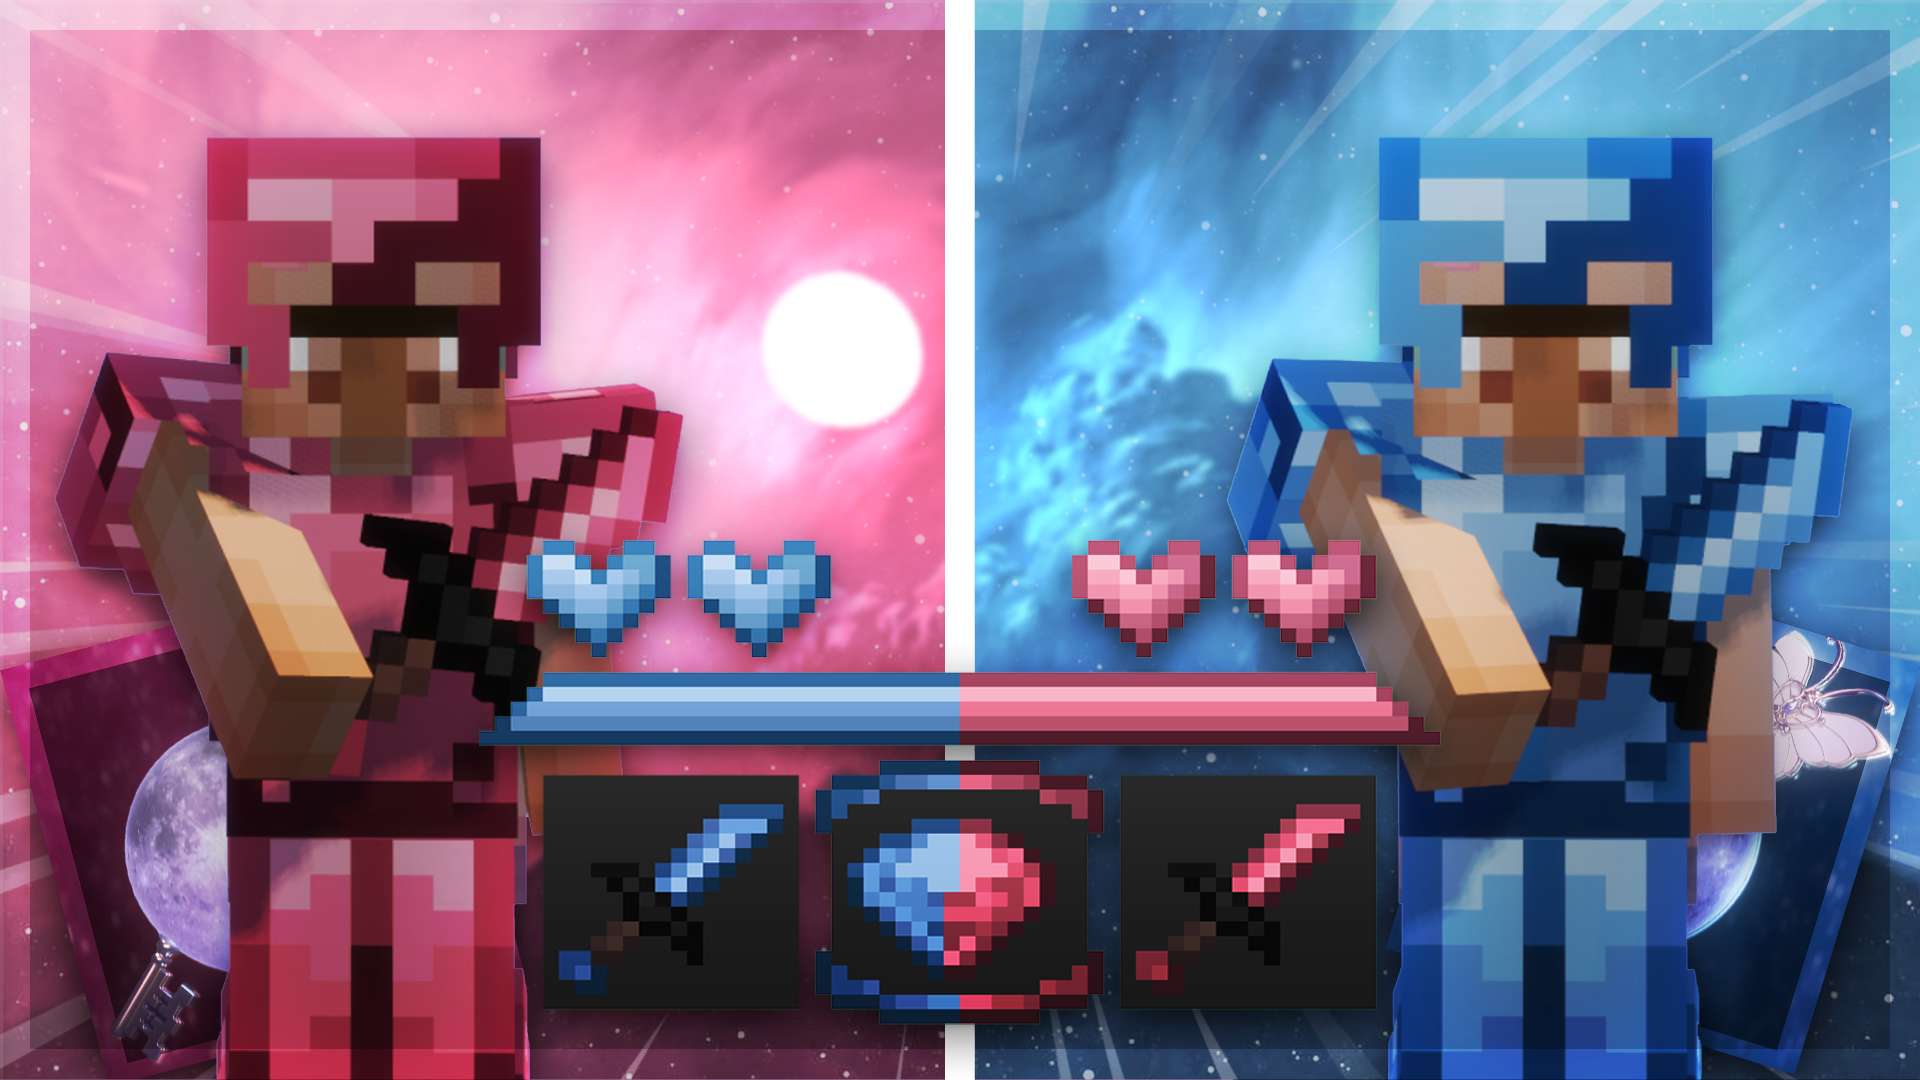 moonlight (pink) 16x by Munjie on PvPRP